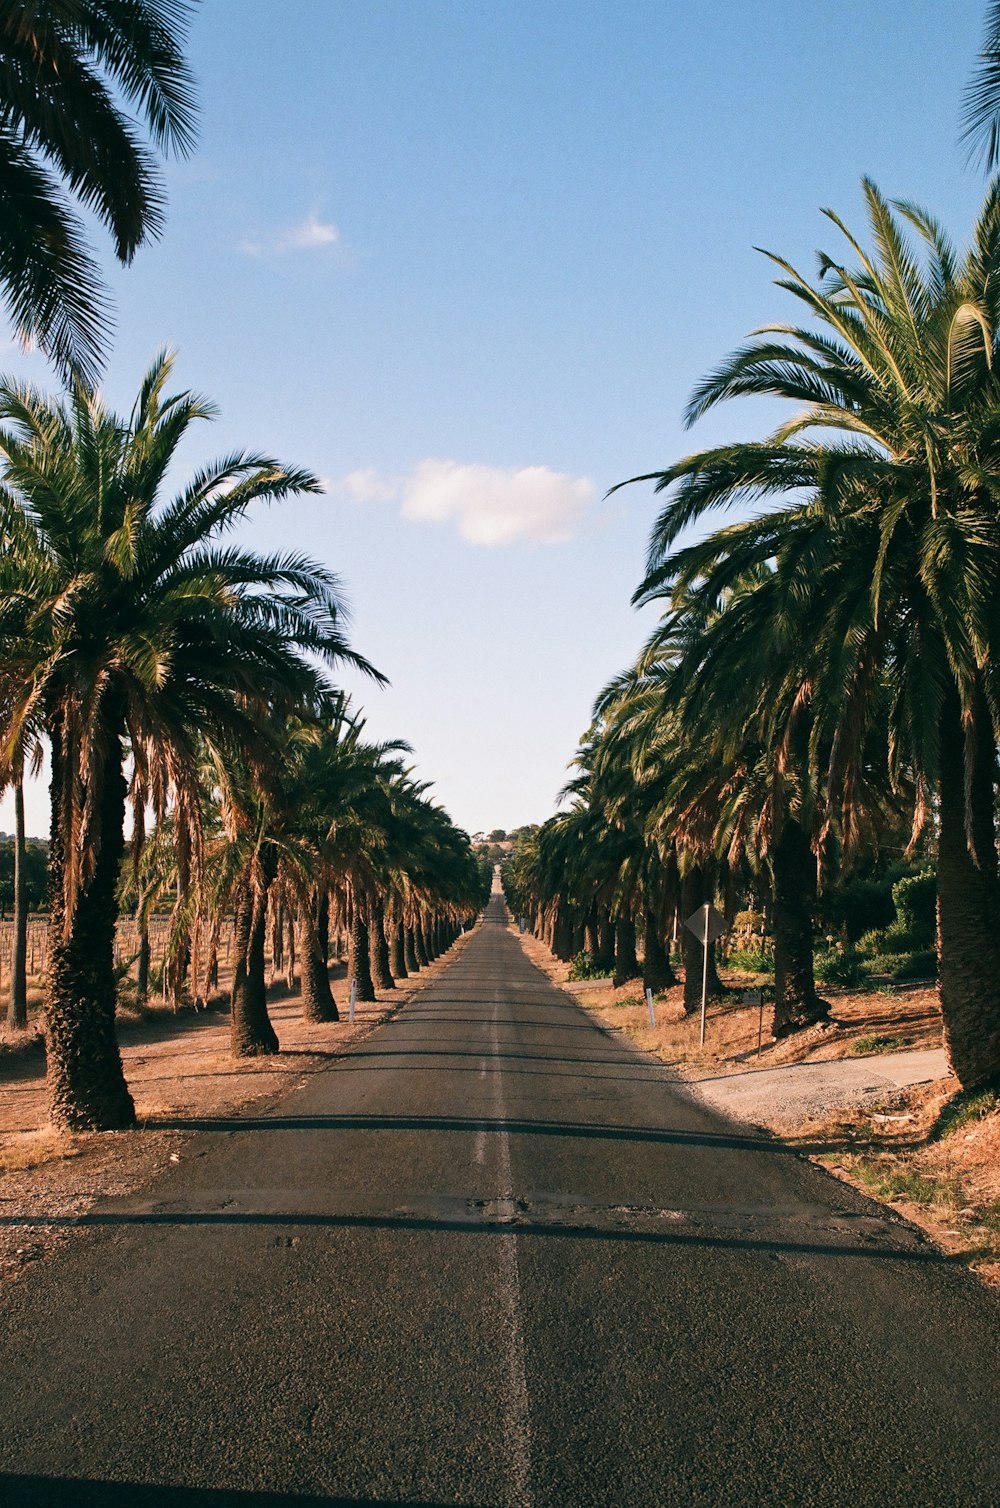 a road lined with palm trees